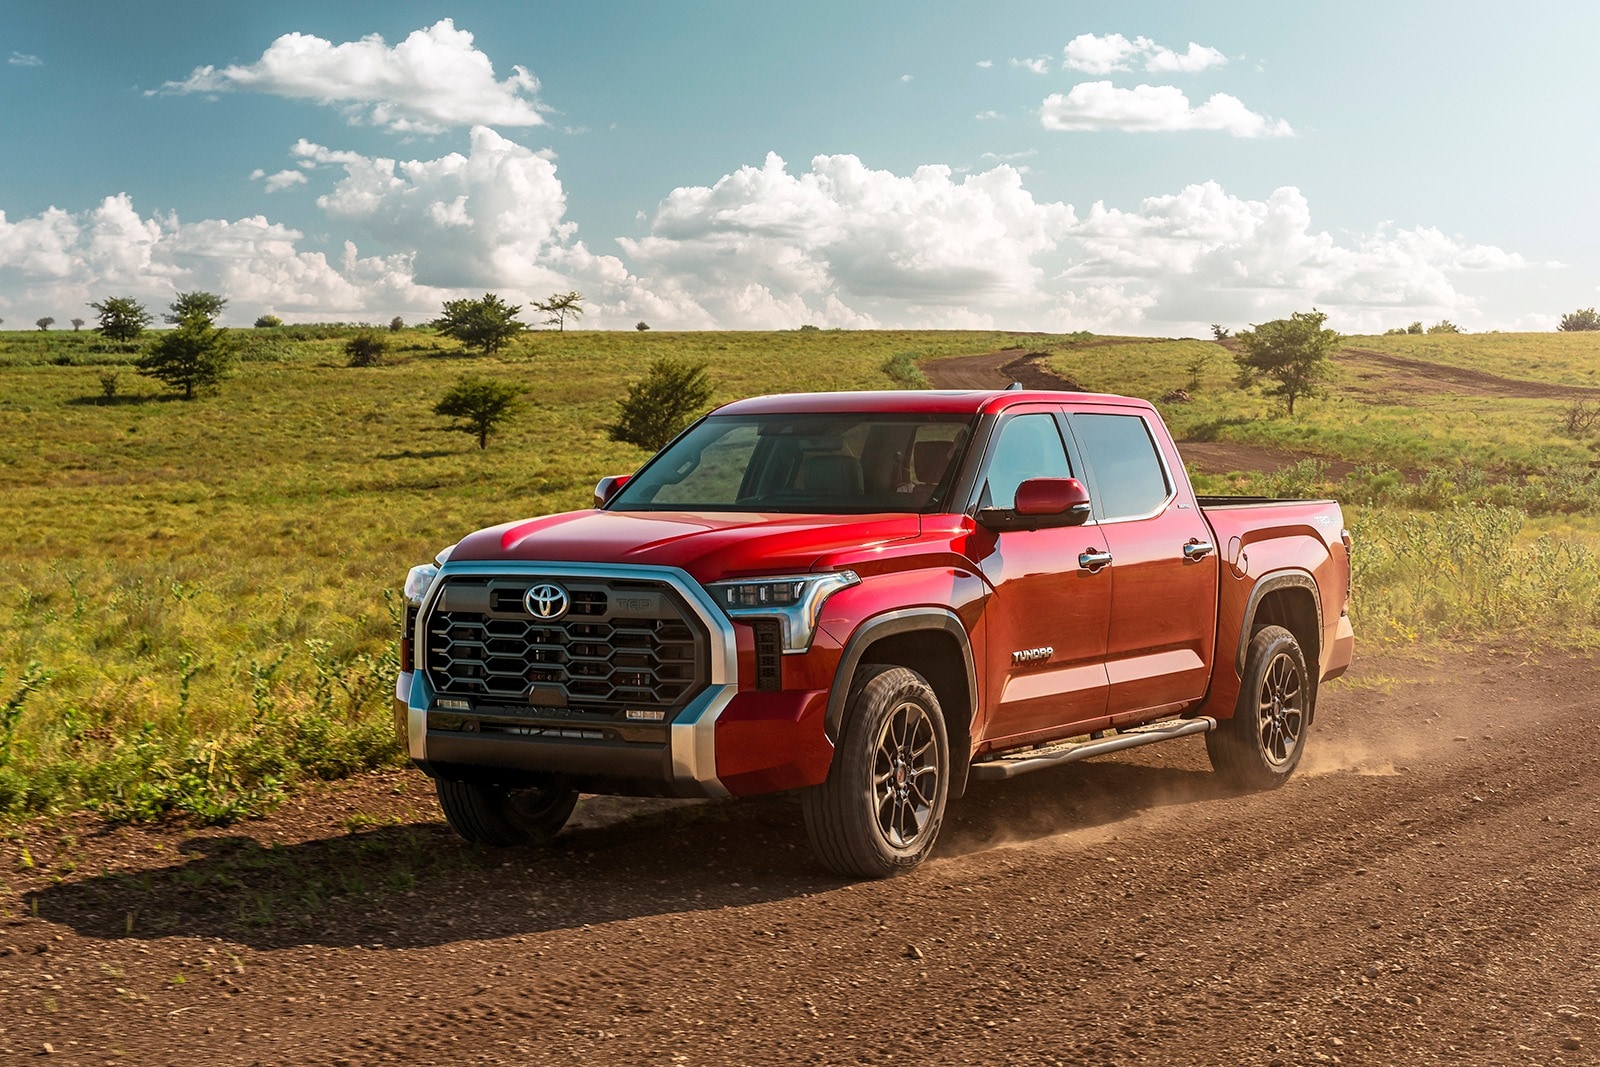 The New 2022 Toyota Tundra Is Finally Here, and We've Rounded Up Its Top 10 Features